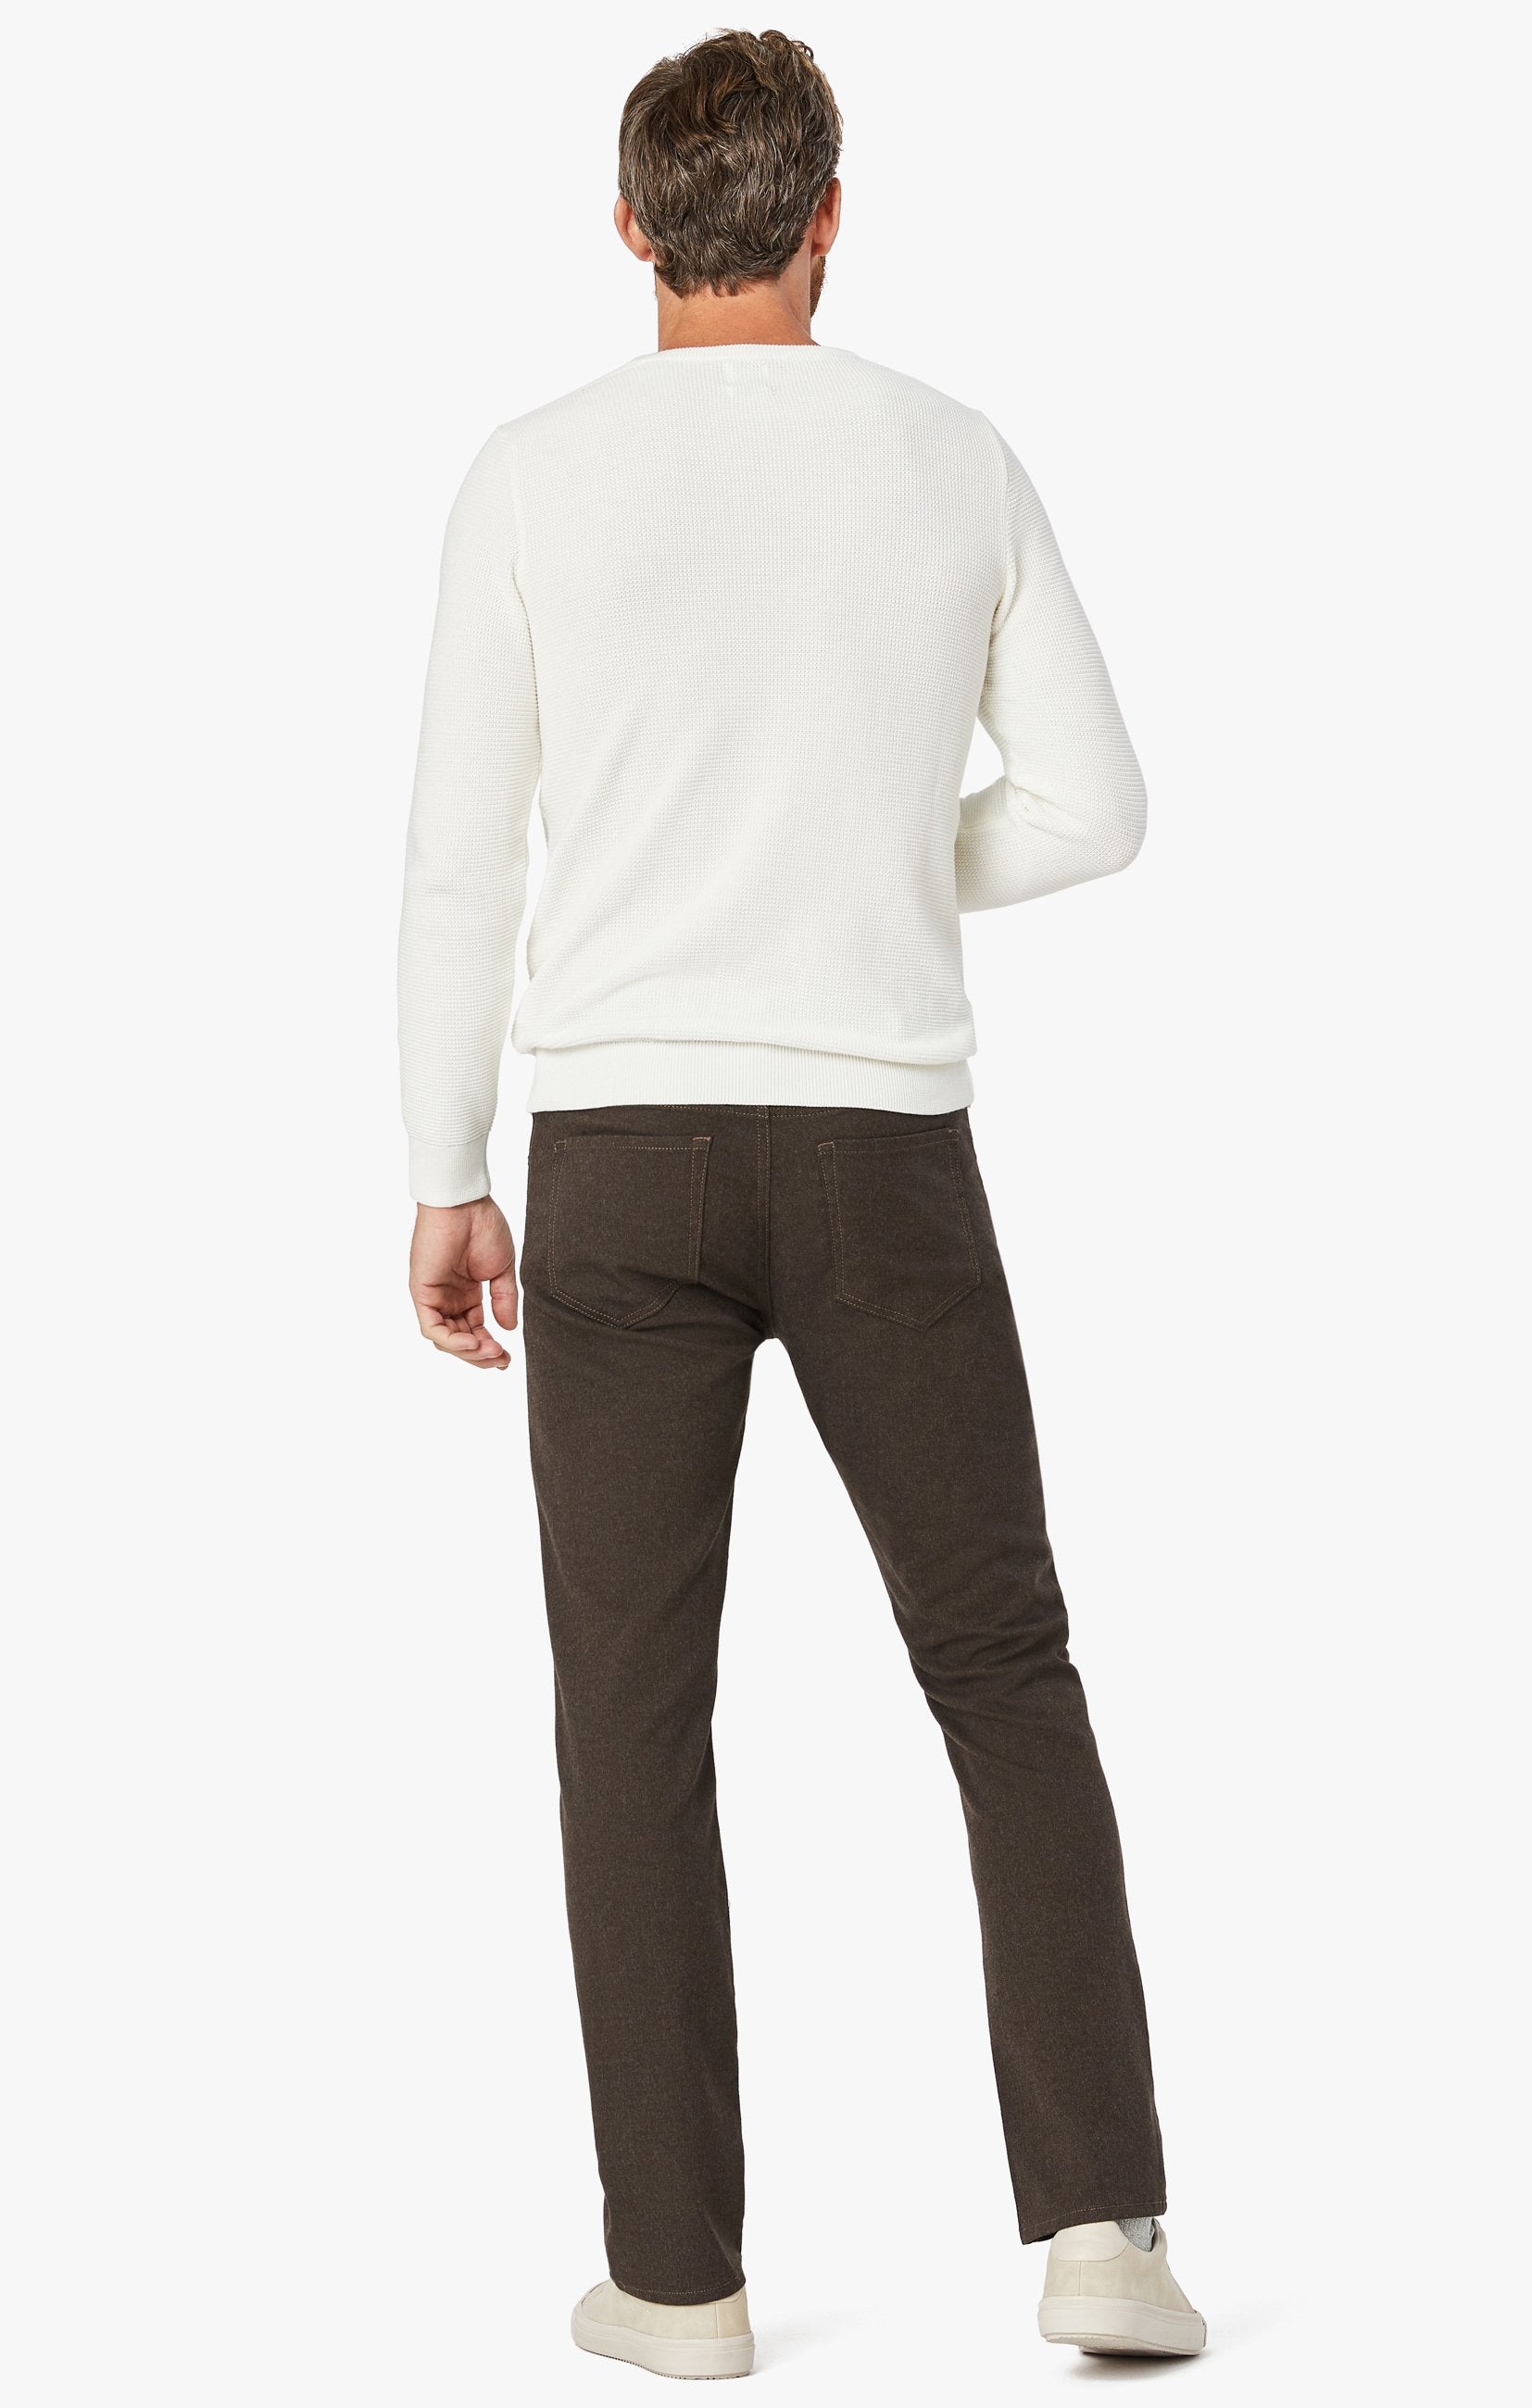 Courage Straight Leg Pants In Coffee Supreme Image 5